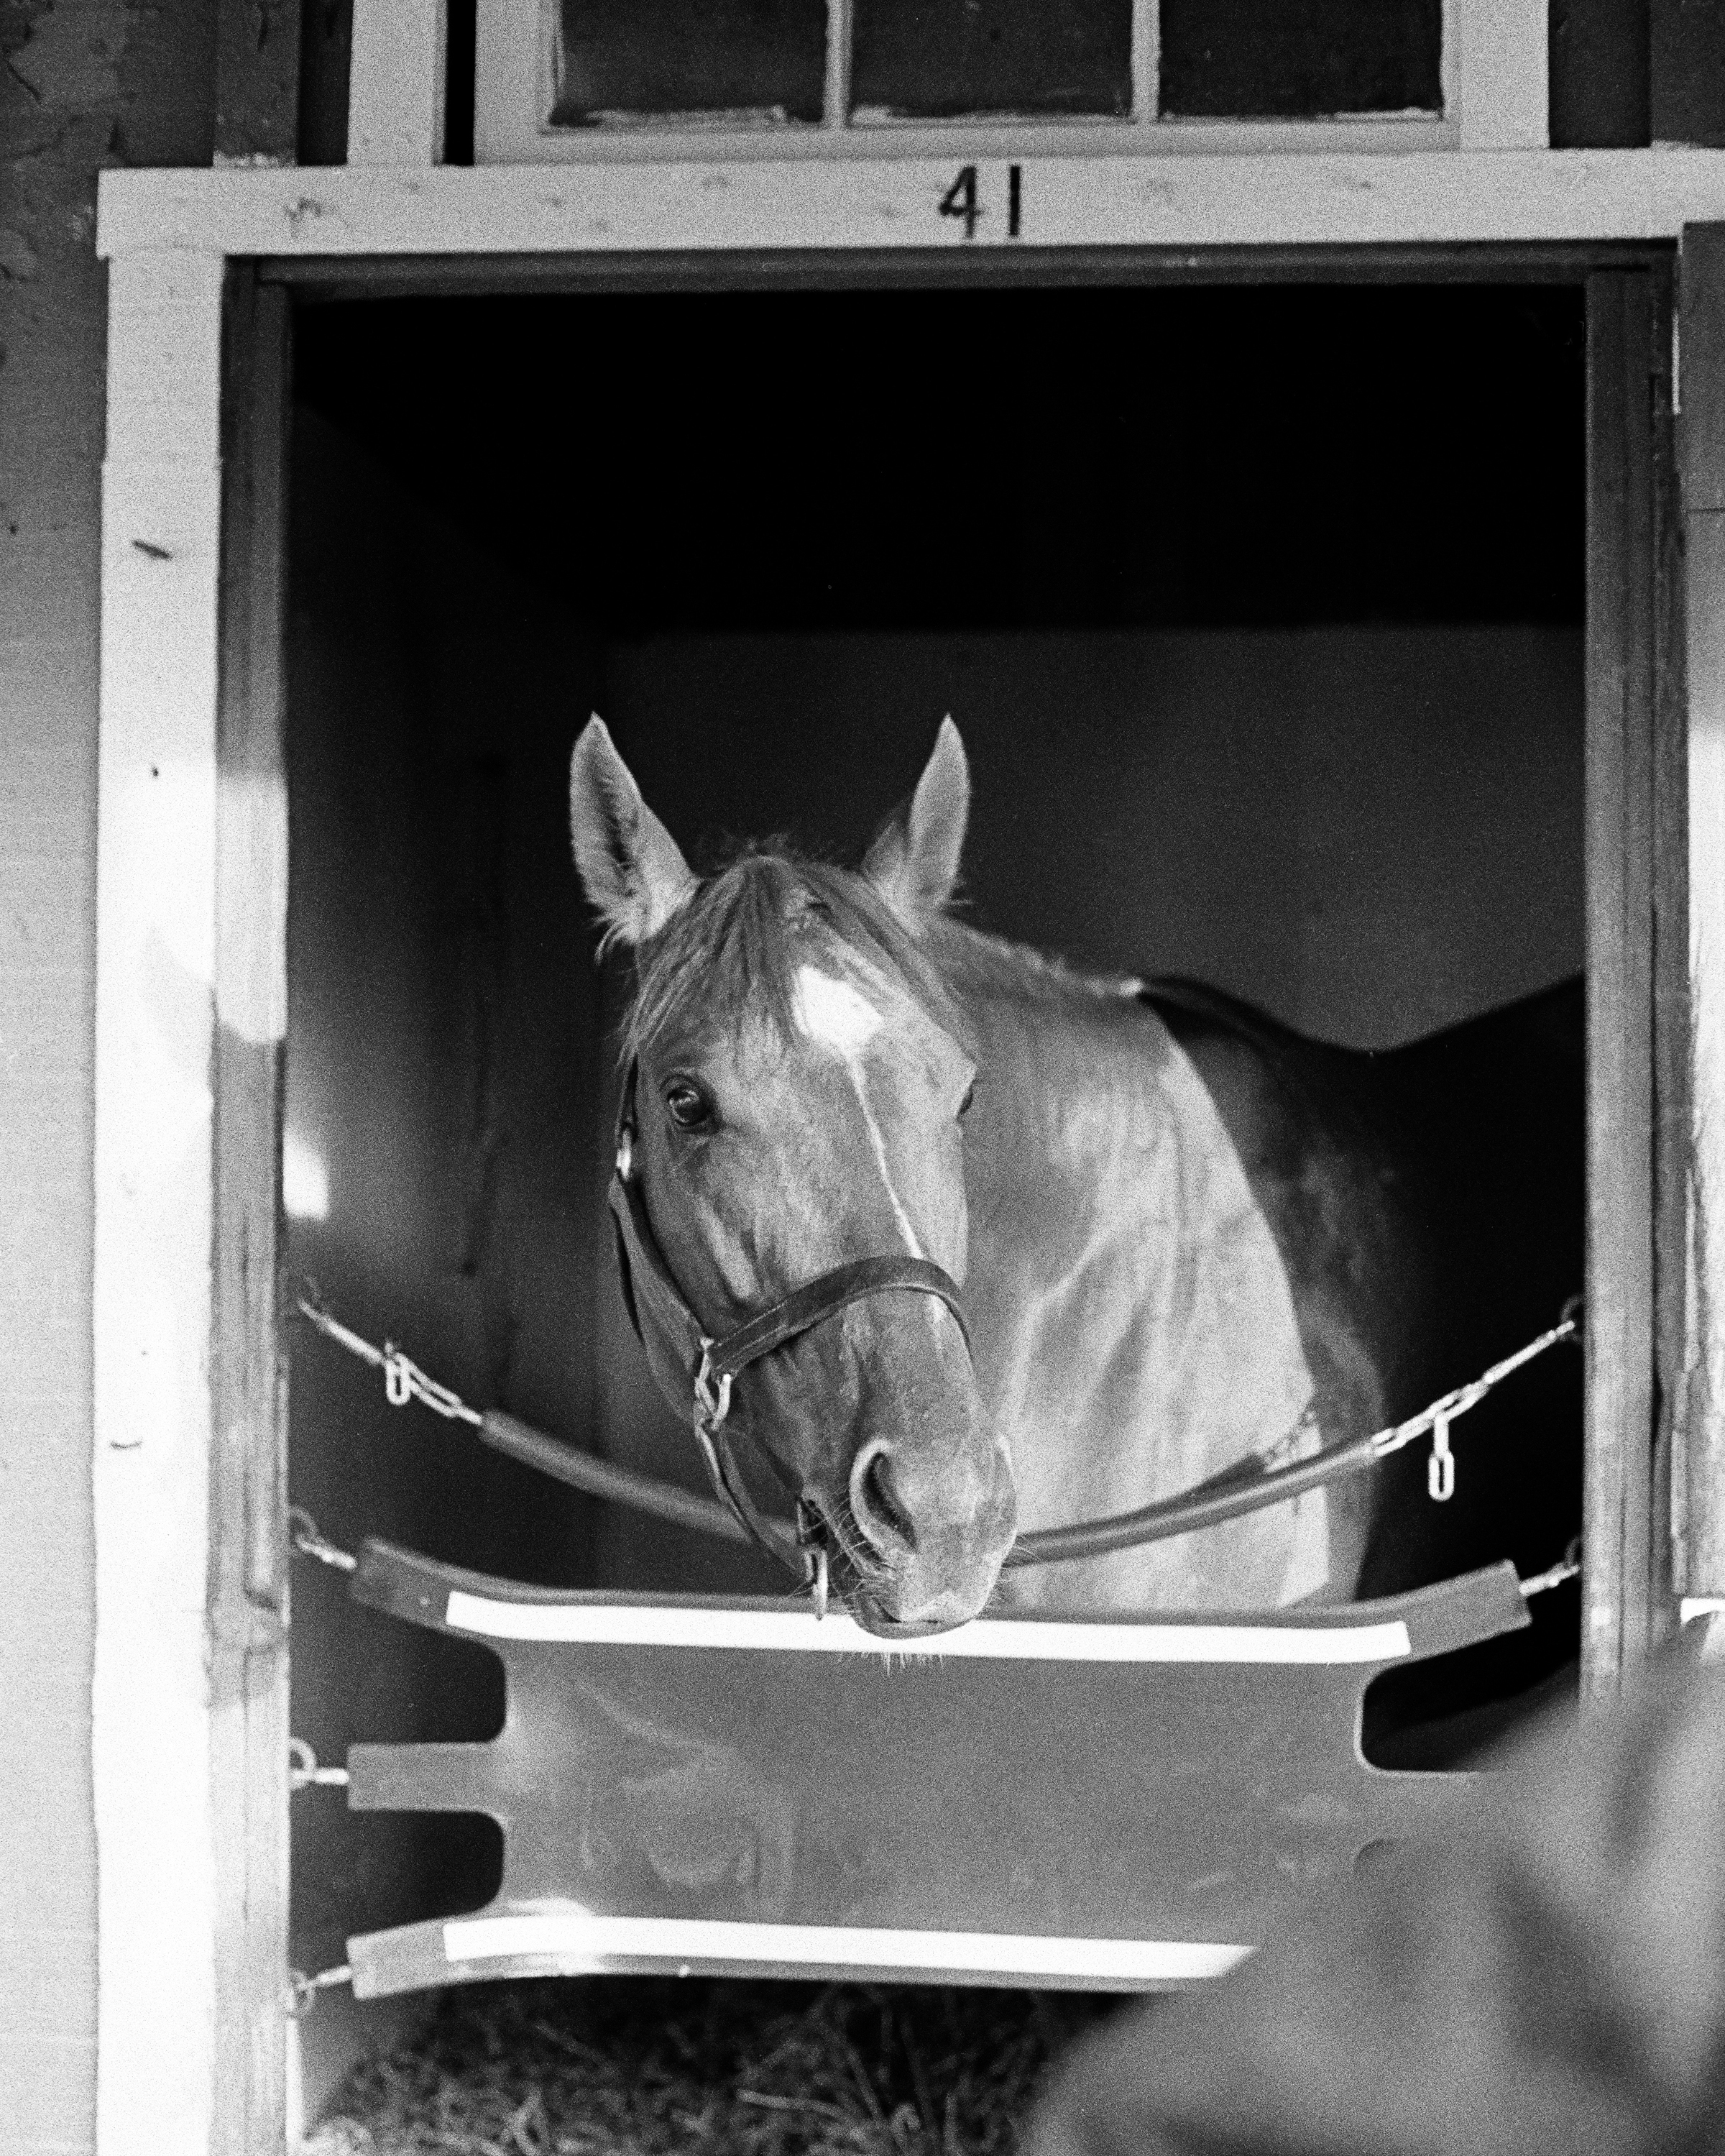 Secretariat at Belmont Park, 1973 (Raymond G. Woolfe, Jr./Thoroughbred Racing Collectibles)